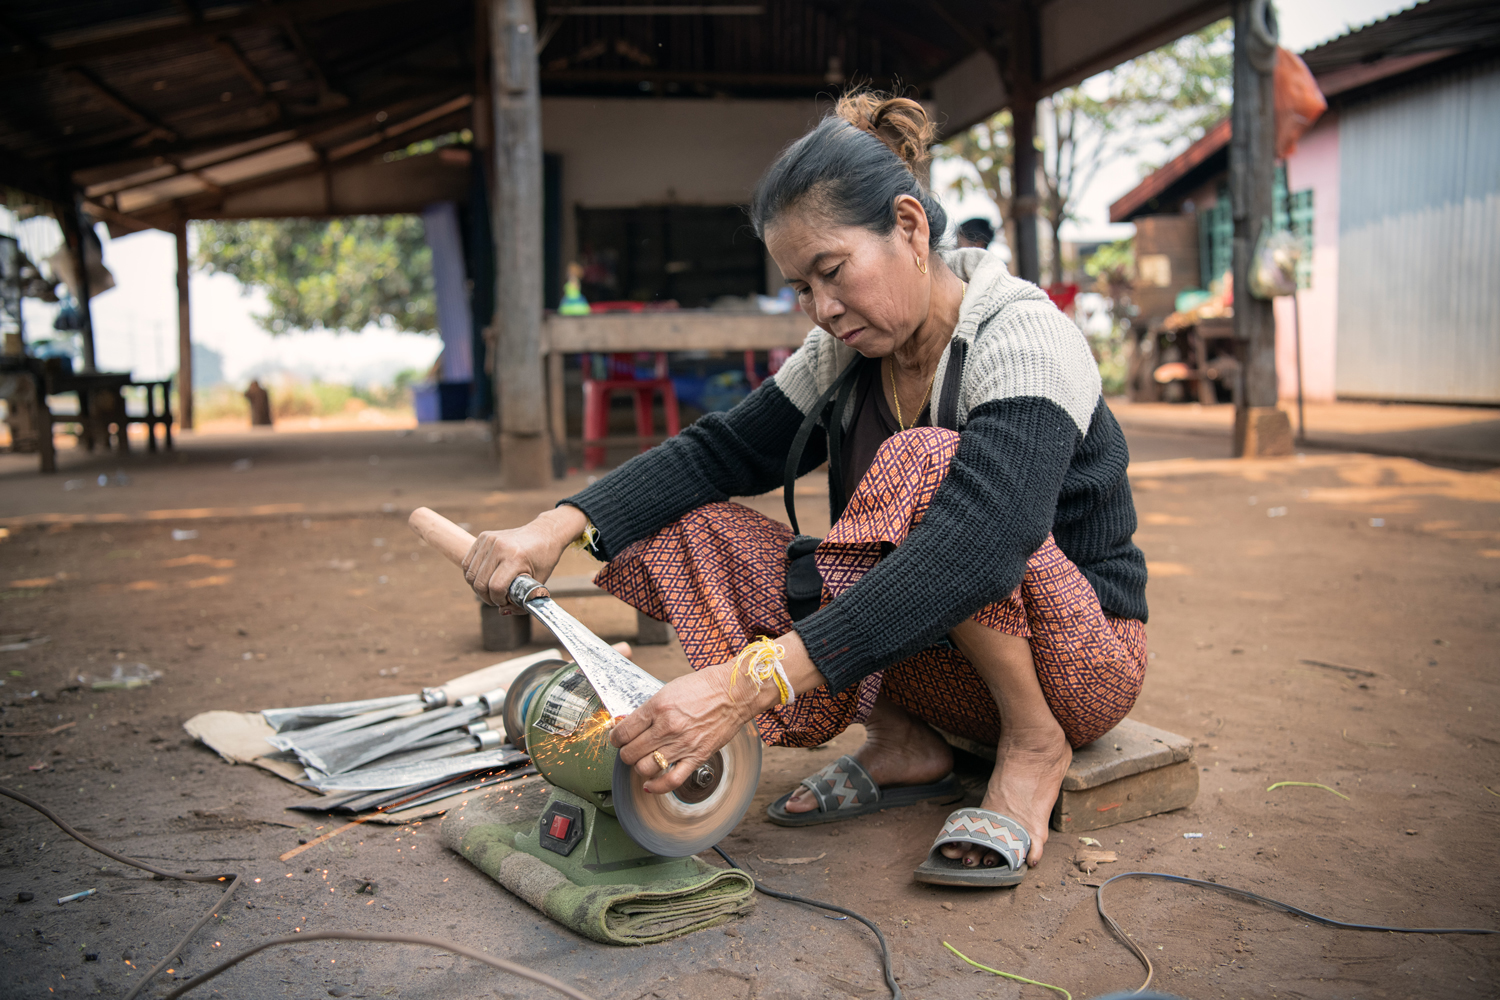 a woman using a knife to sharpen a metal object